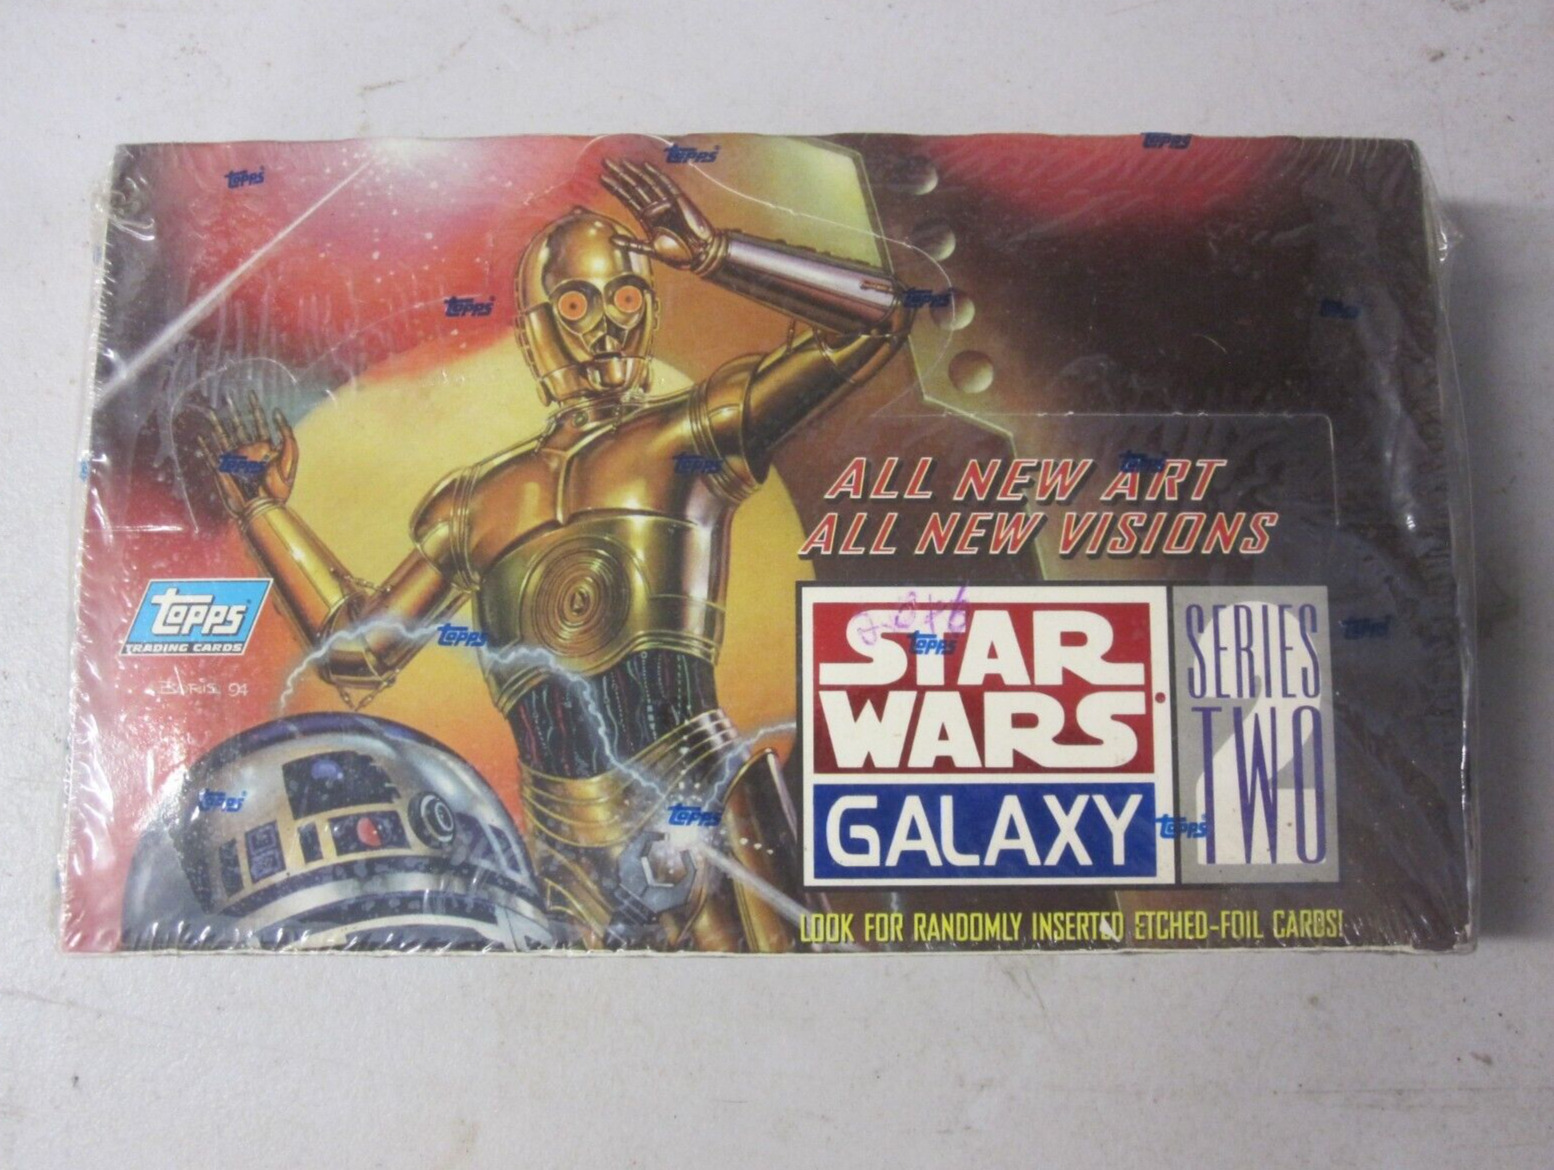 1994 Topps Star Wars Galaxy Series 2 Trading Card Box 36 Pack - Sealed